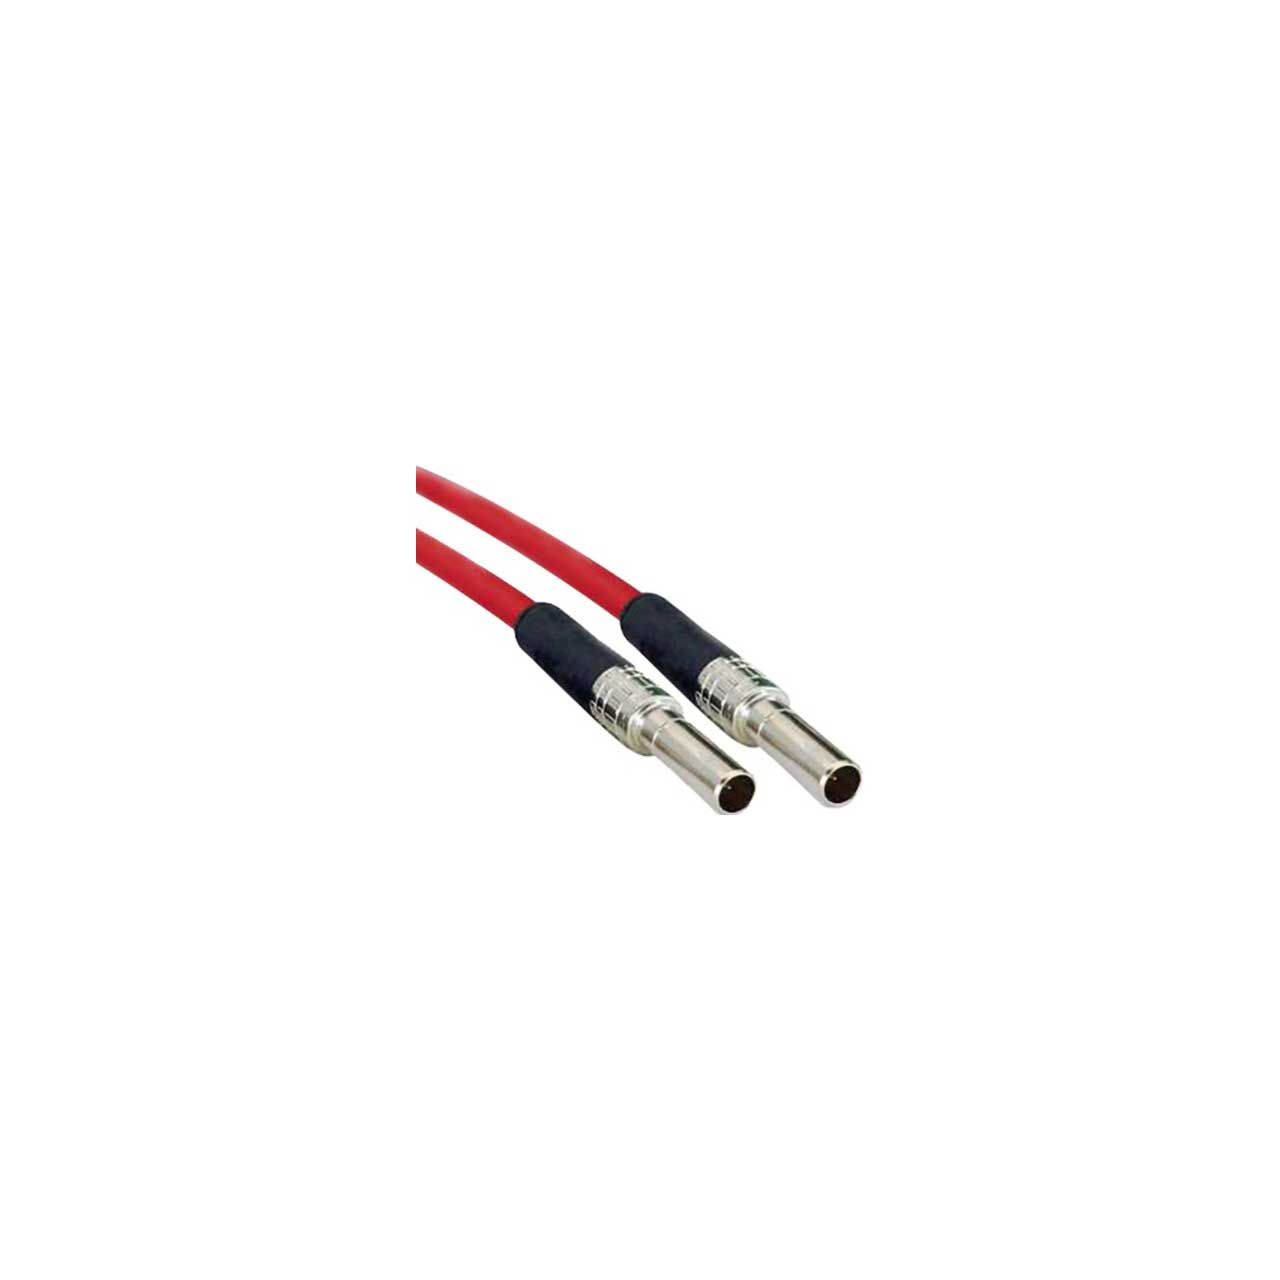 AVP MPC-10-Red Midsize 3G HD-SDI Video Patchcord - Red - 10 Foot MPC-10-RED